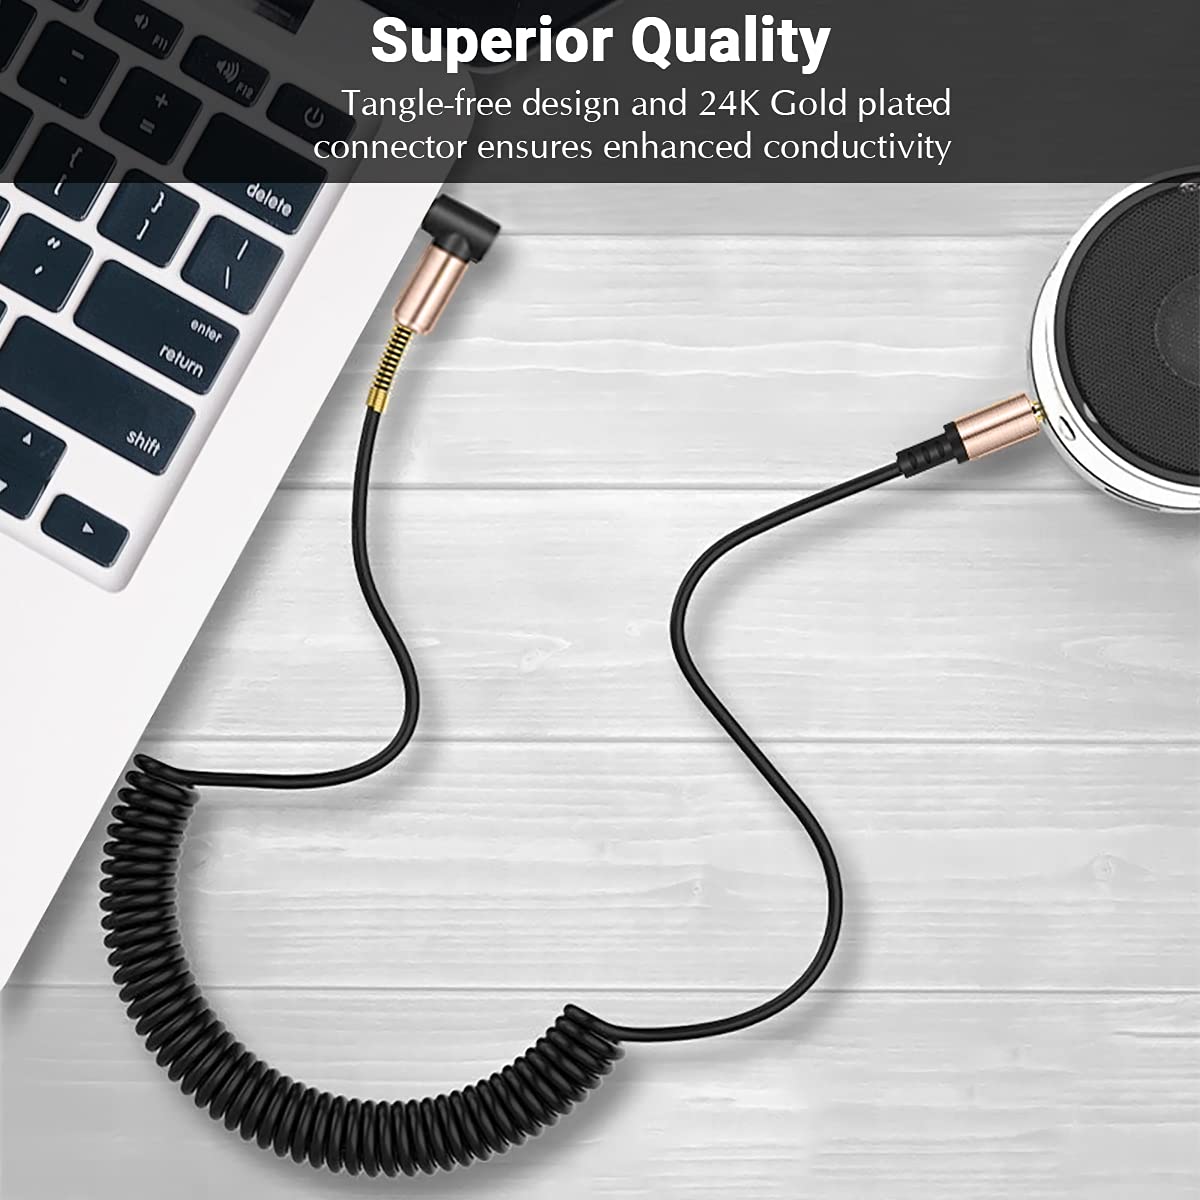 AUX Cable 30CM Spring Coiled 3.5mm Auxiliary Audio Lead Male to Male Right Angle Stereo Jack Cord Compatible with iPhone iPod iPad Samsung Smartphone Tablet MP3 Player Headphones Home Car